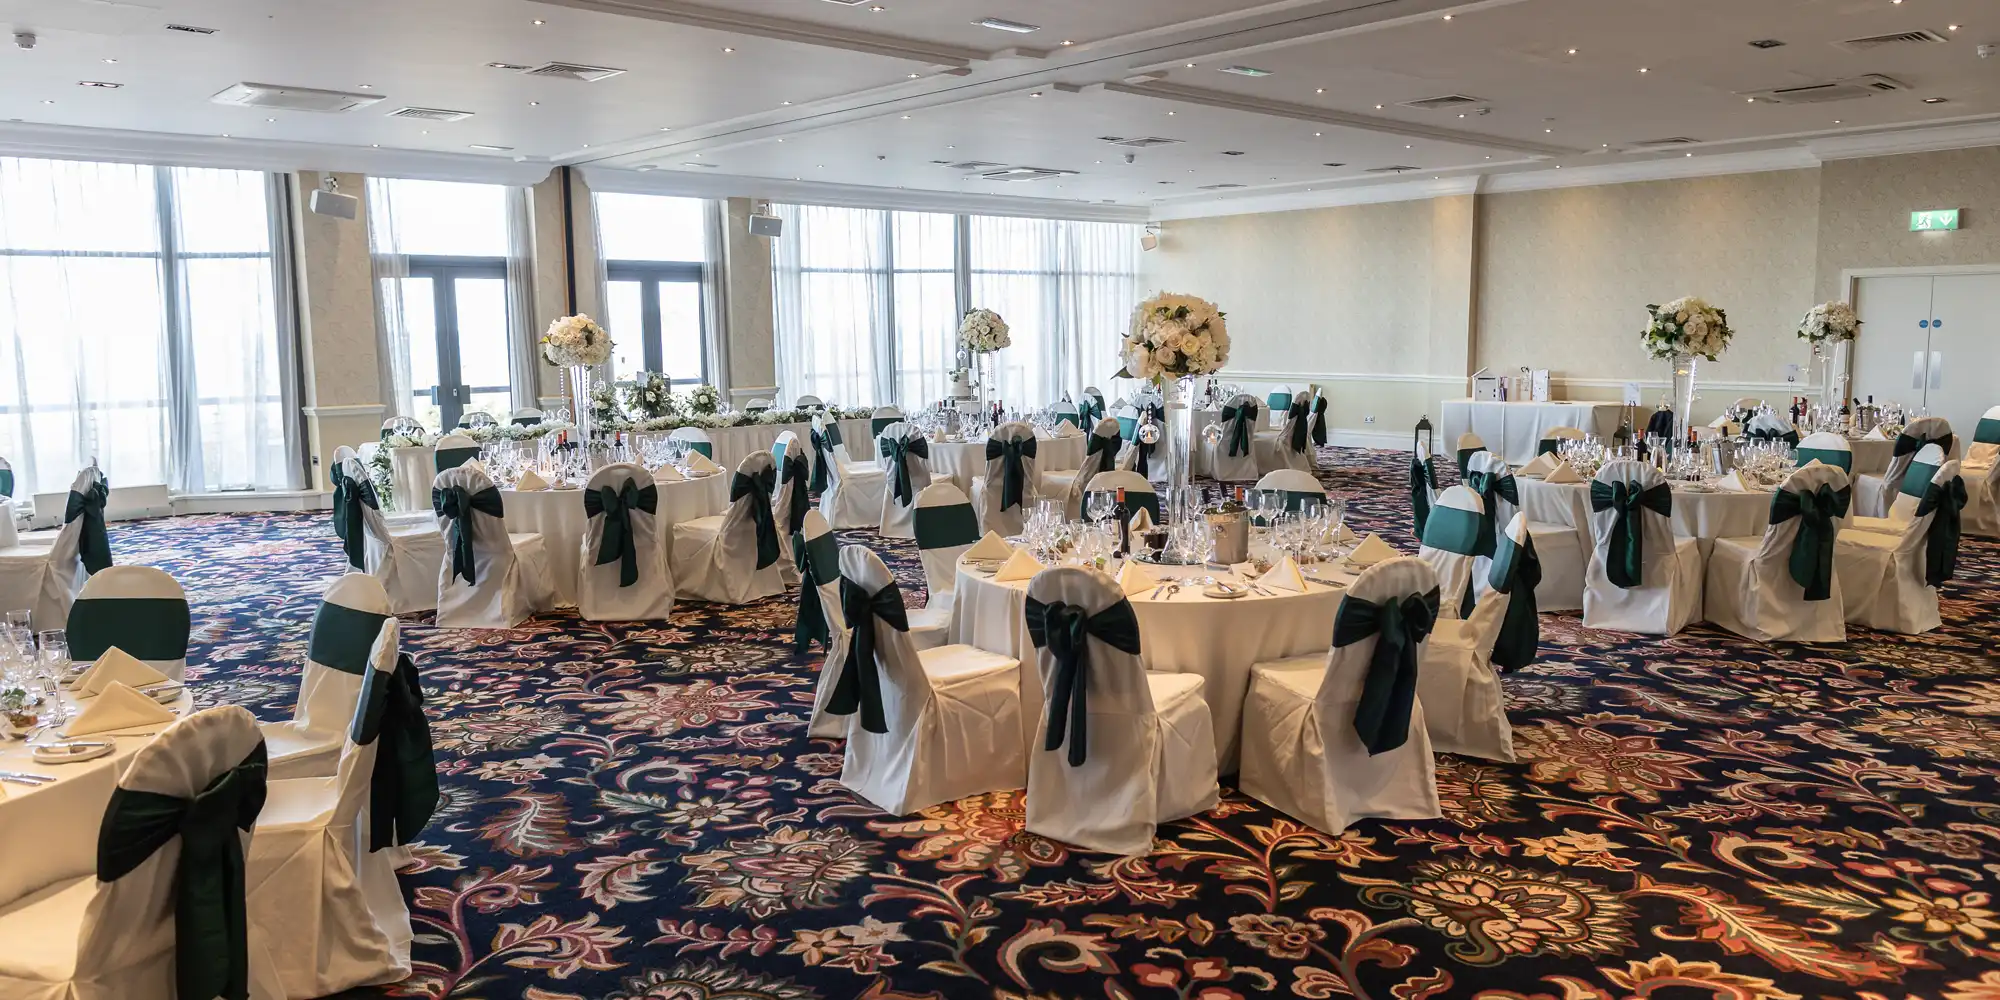 Elegant banquet hall setup with round tables, white linens, dark green chair sashes, and floral centerpieces, under soft lighting.